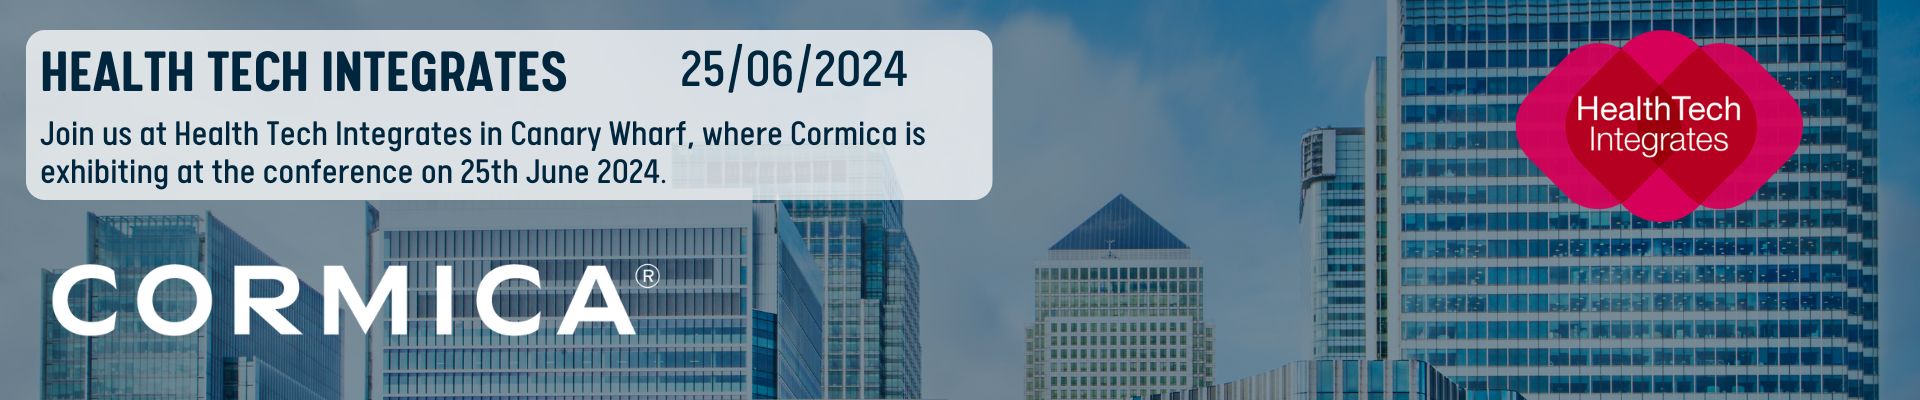 Background image of Canary Wharf, London, with overlaying logo of Health Tech Integrates and Cormica.Text promotes Cormica attending Health Tech Integrates conference